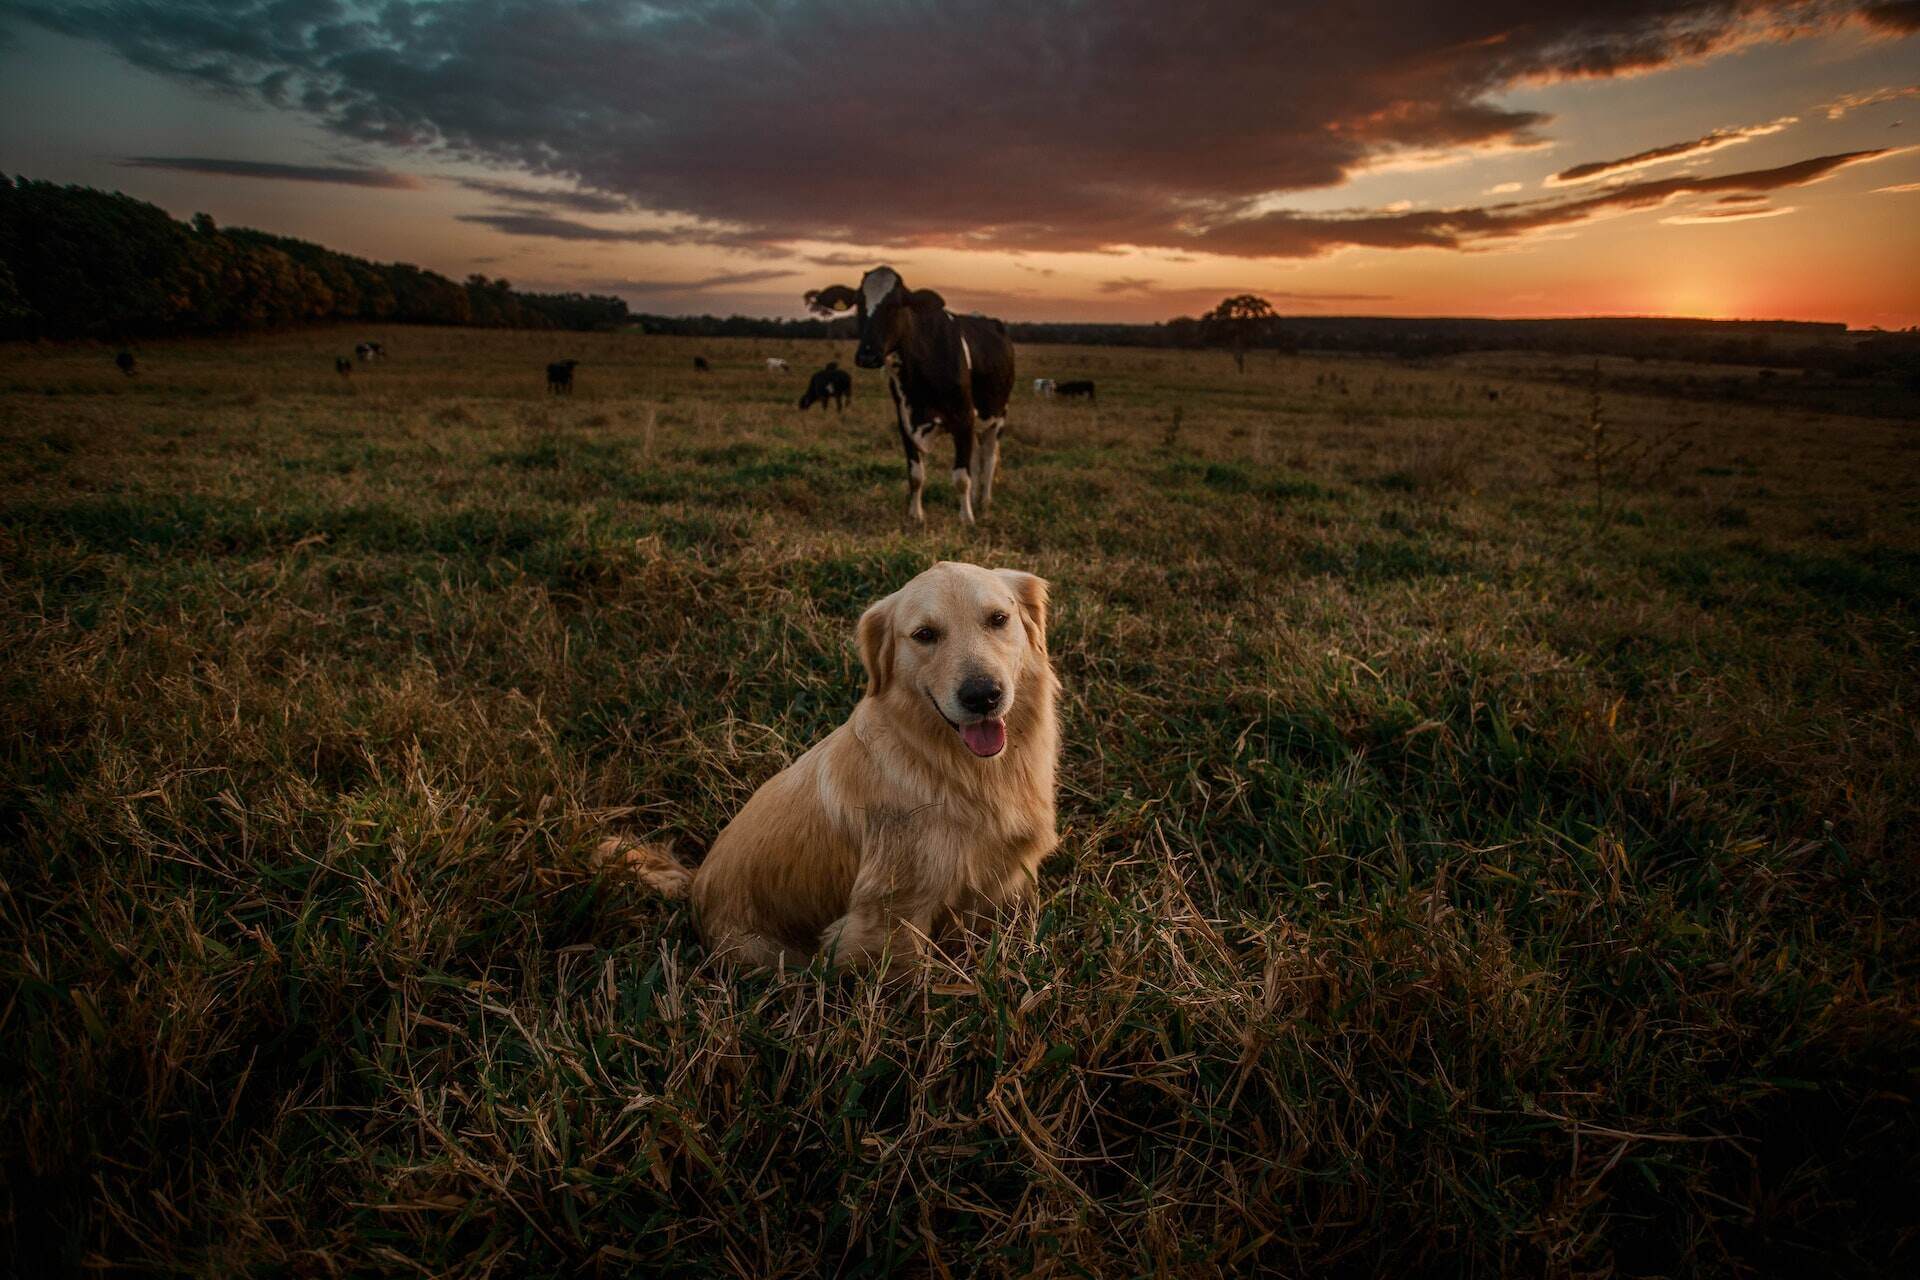 A dog sitting in a field at sunset